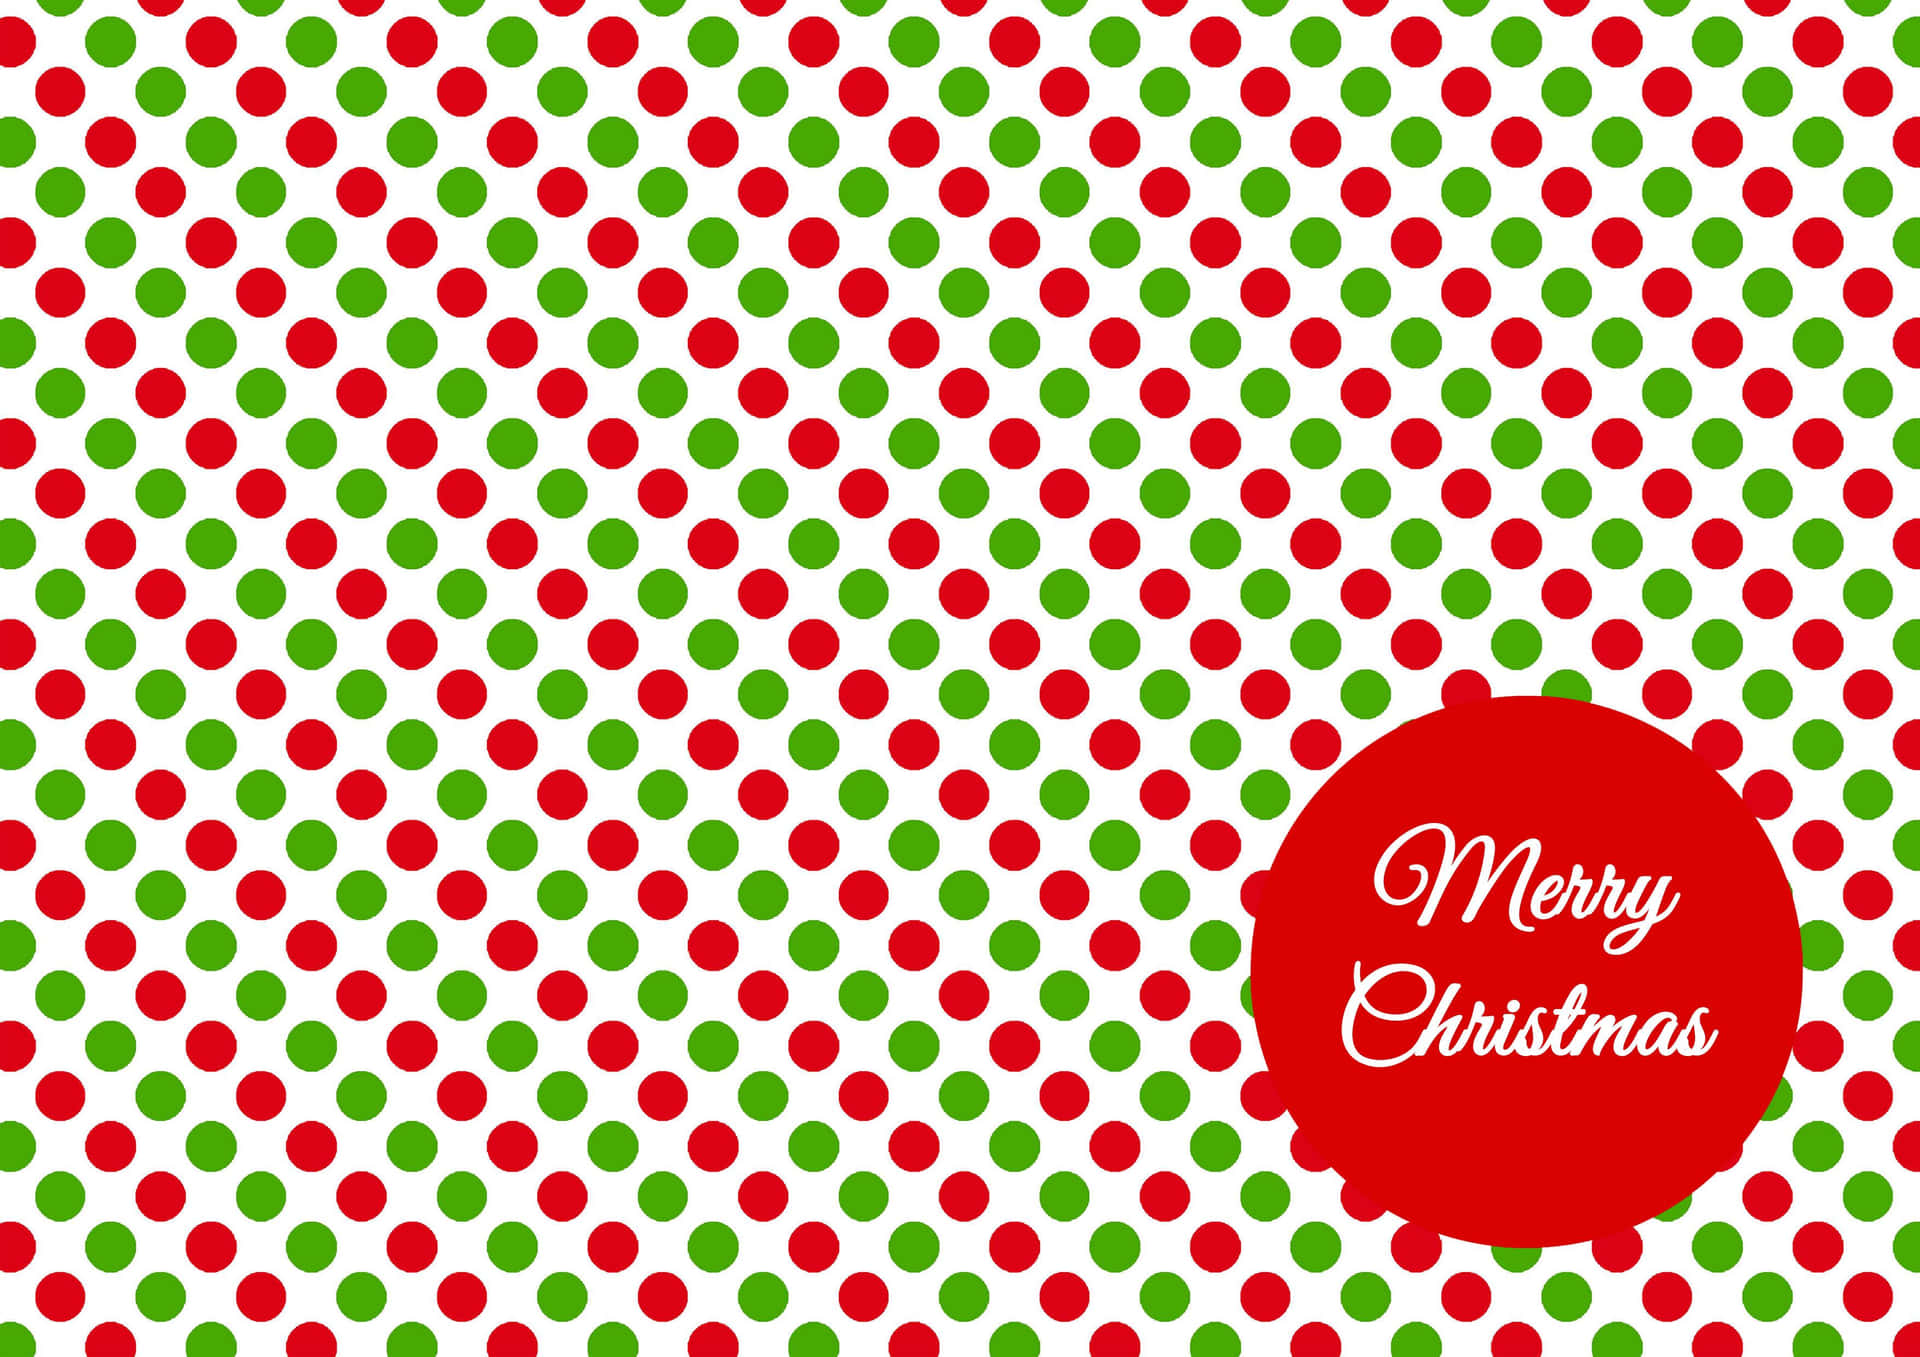 Celebrate The Holidays With Red And Green Christmas Decorations Wallpaper